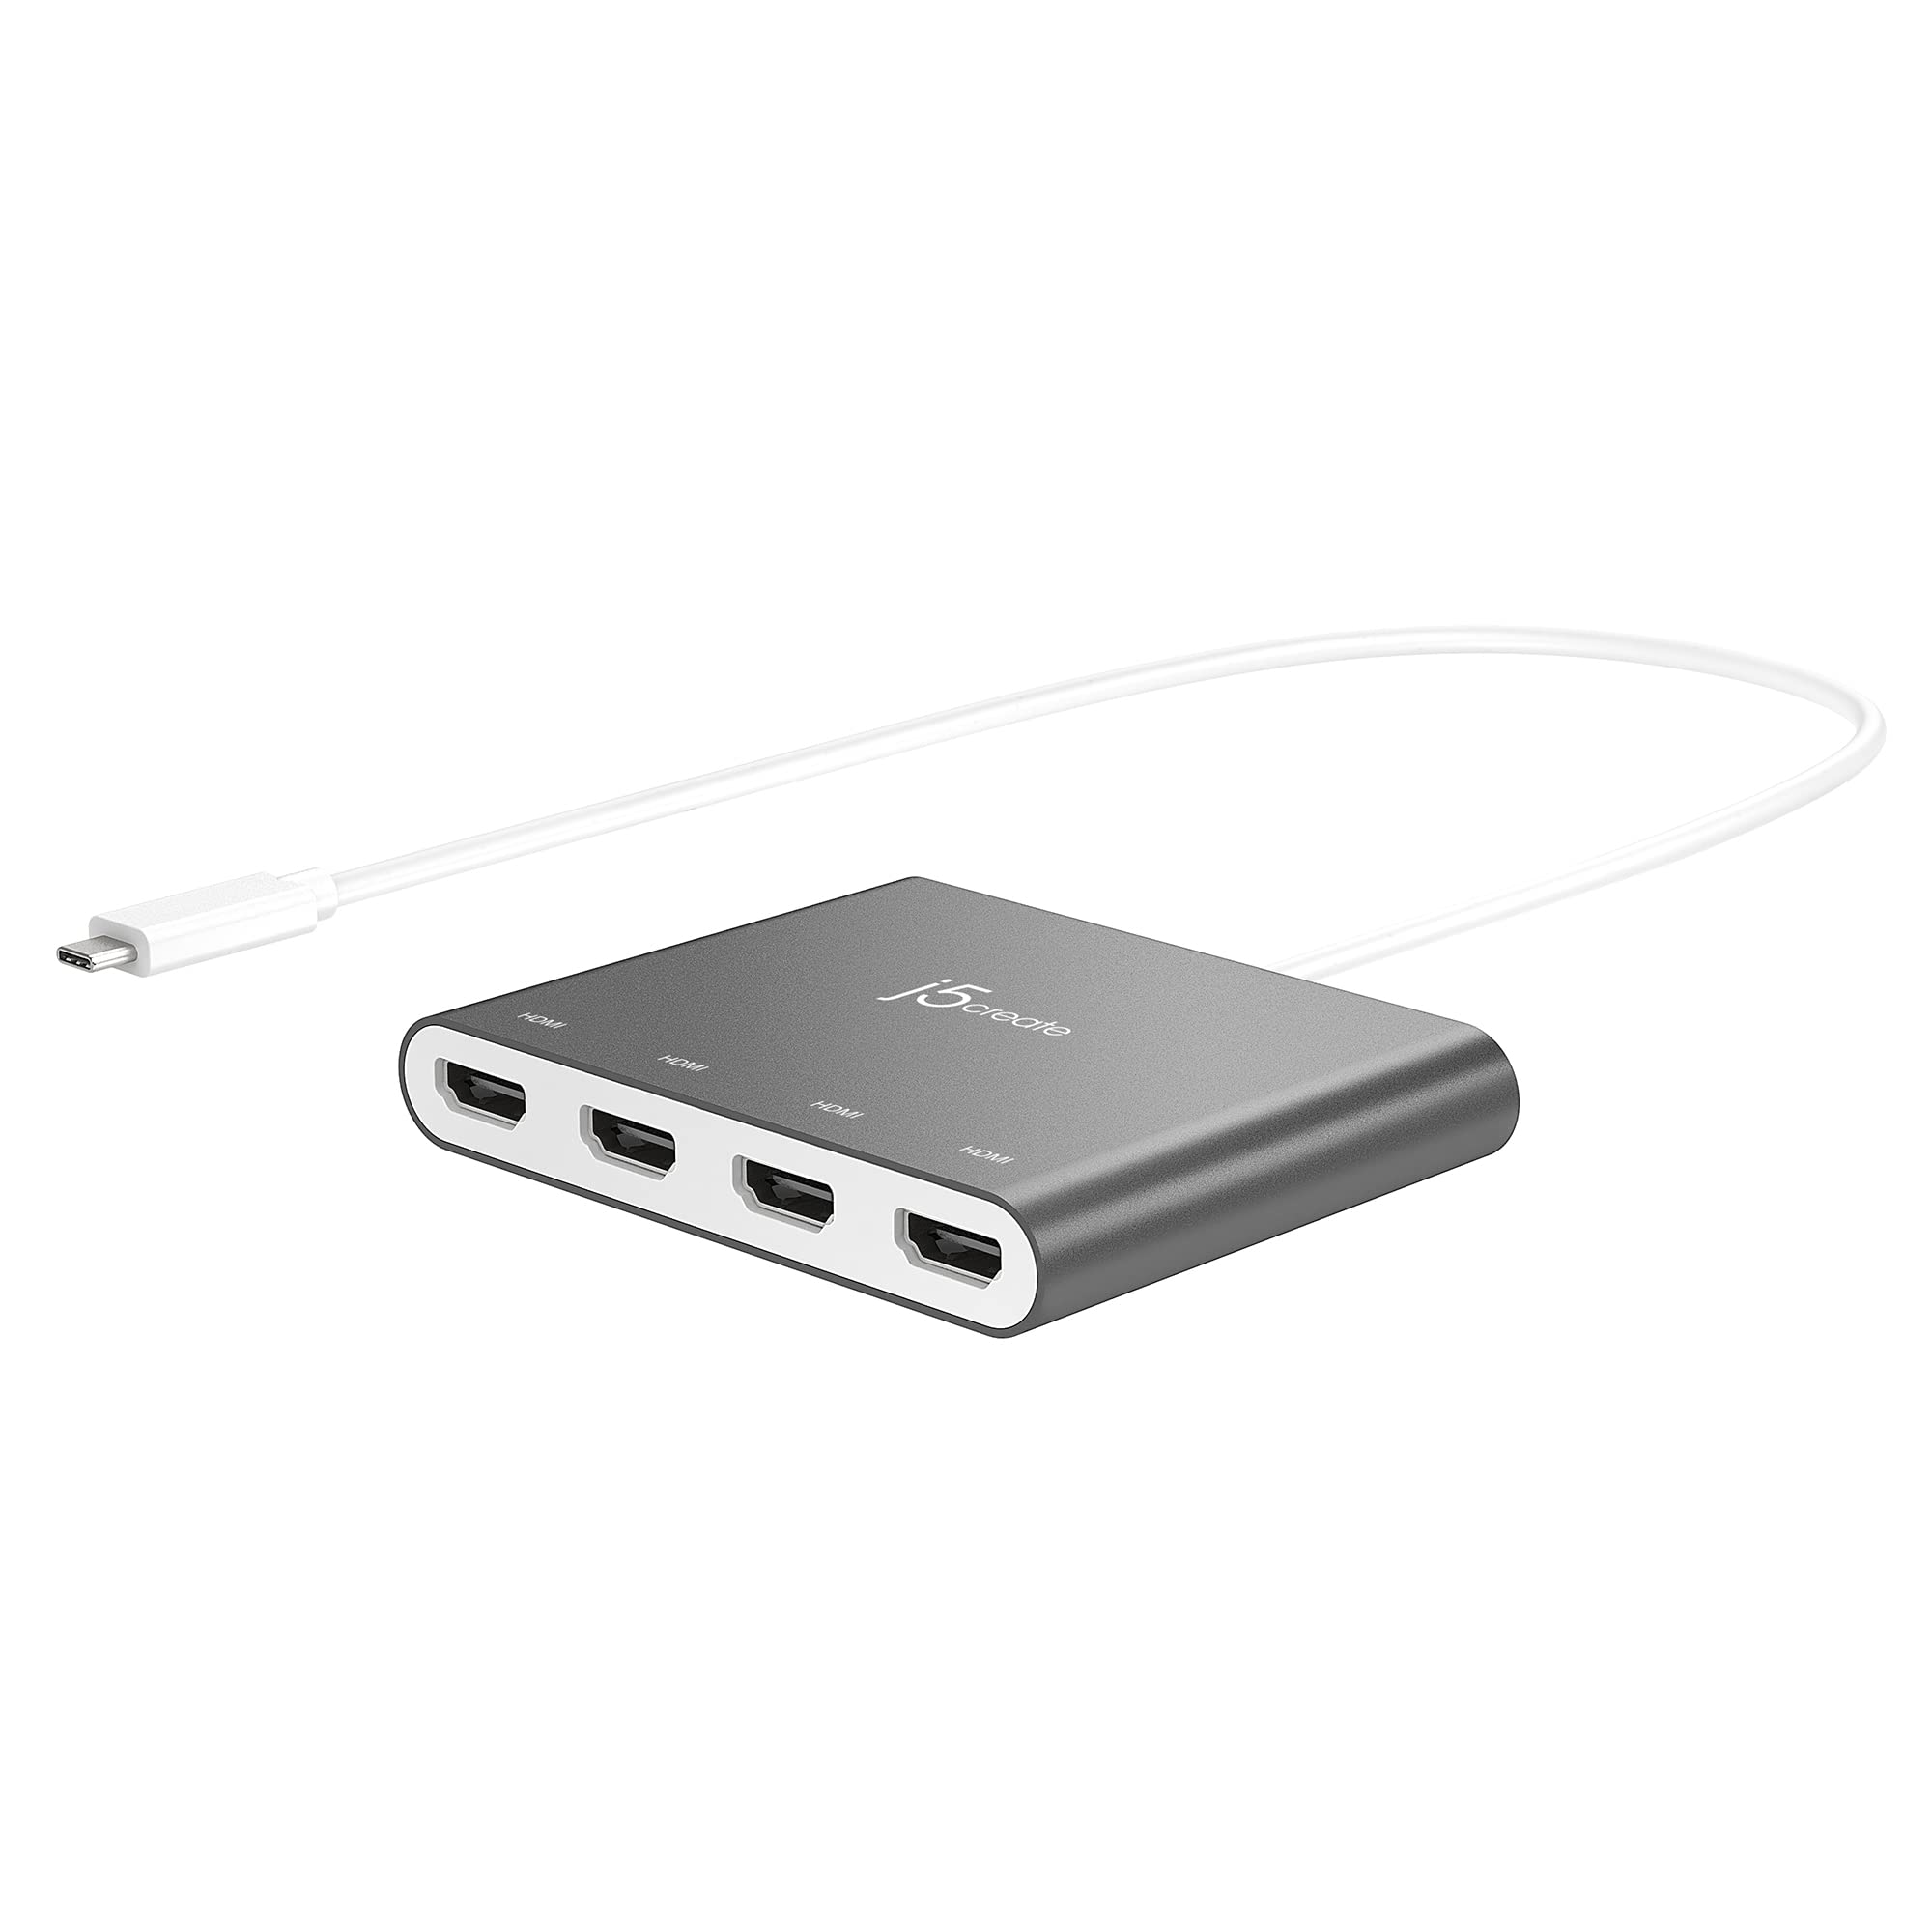 j5create USB-C to 4 Port HDMI Adapter Hub- Multi Monitor Splitter - Support 4 1080p 60Hz Displays - Compatible with Type-C MacBook and Windows Laptop (JCA366)